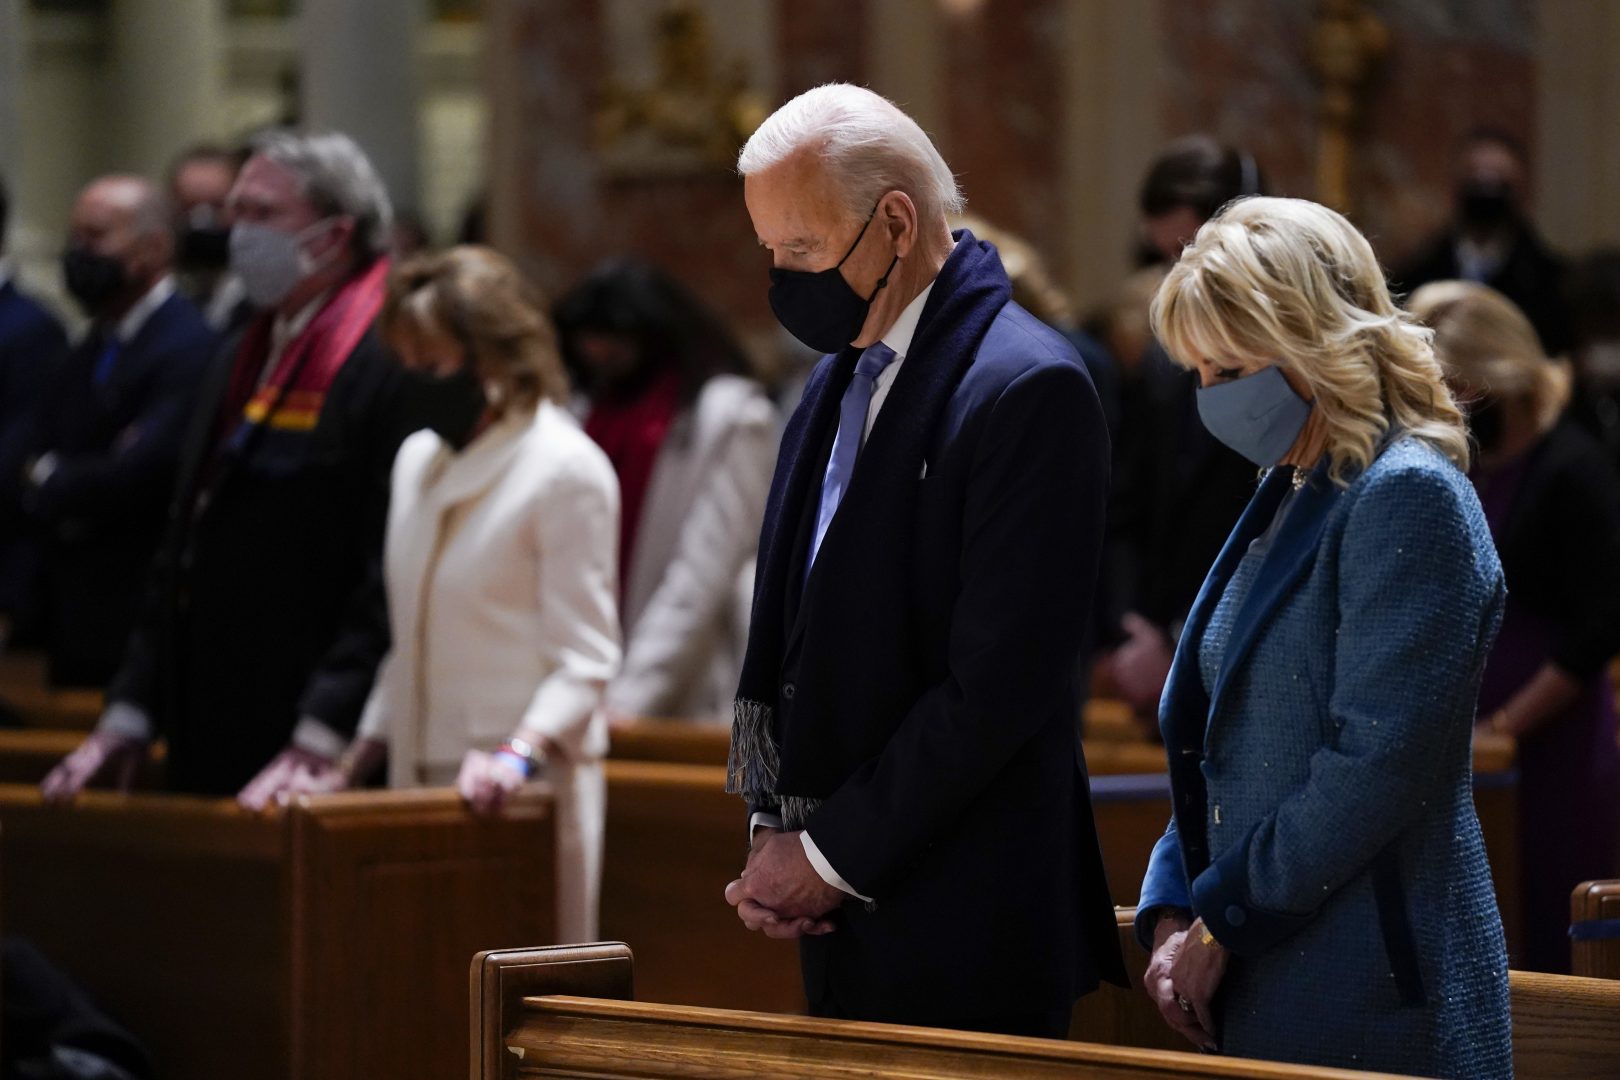 FILE PHOTO: In this Wednesday, Jan. 20, 2021 file photo, President-elect Joe Biden and his wife, Jill Biden, attend Mass at the Cathedral of St. Matthew the Apostle during Inauguration Day ceremonies in Washington. When U.S. Catholic bishops hold their next national meeting in June 2021, they’ll be deciding whether to send a tougher-than-ever message to President Joe Biden and other Catholic politicians: Don’t partake of Communion if you persist in public advocacy of abortion rights.